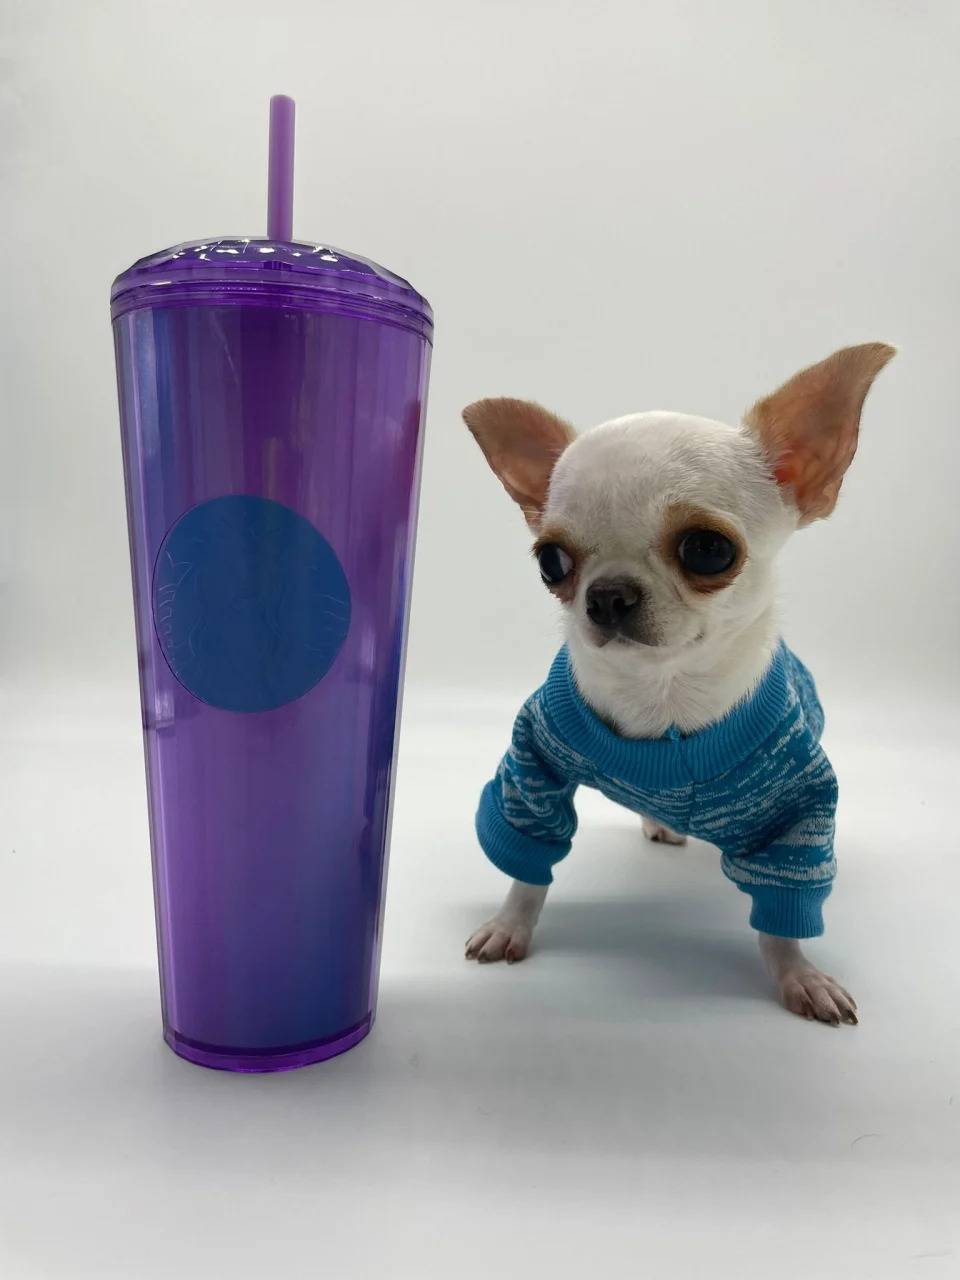 Pearl, a 2-year-old chihuahua, is the world's shortest living dog.